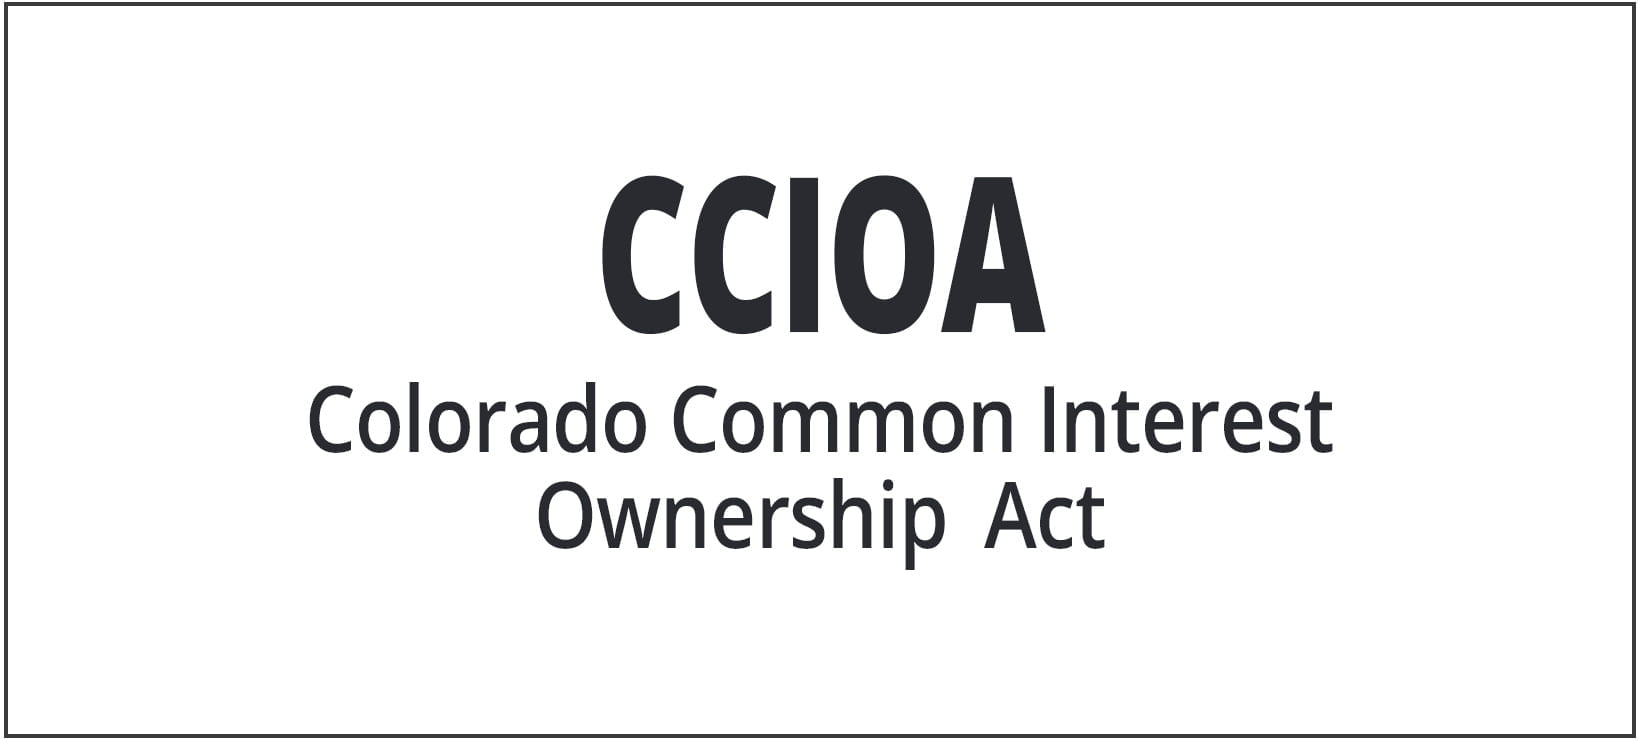 Colorado Common Interest Ownership Act